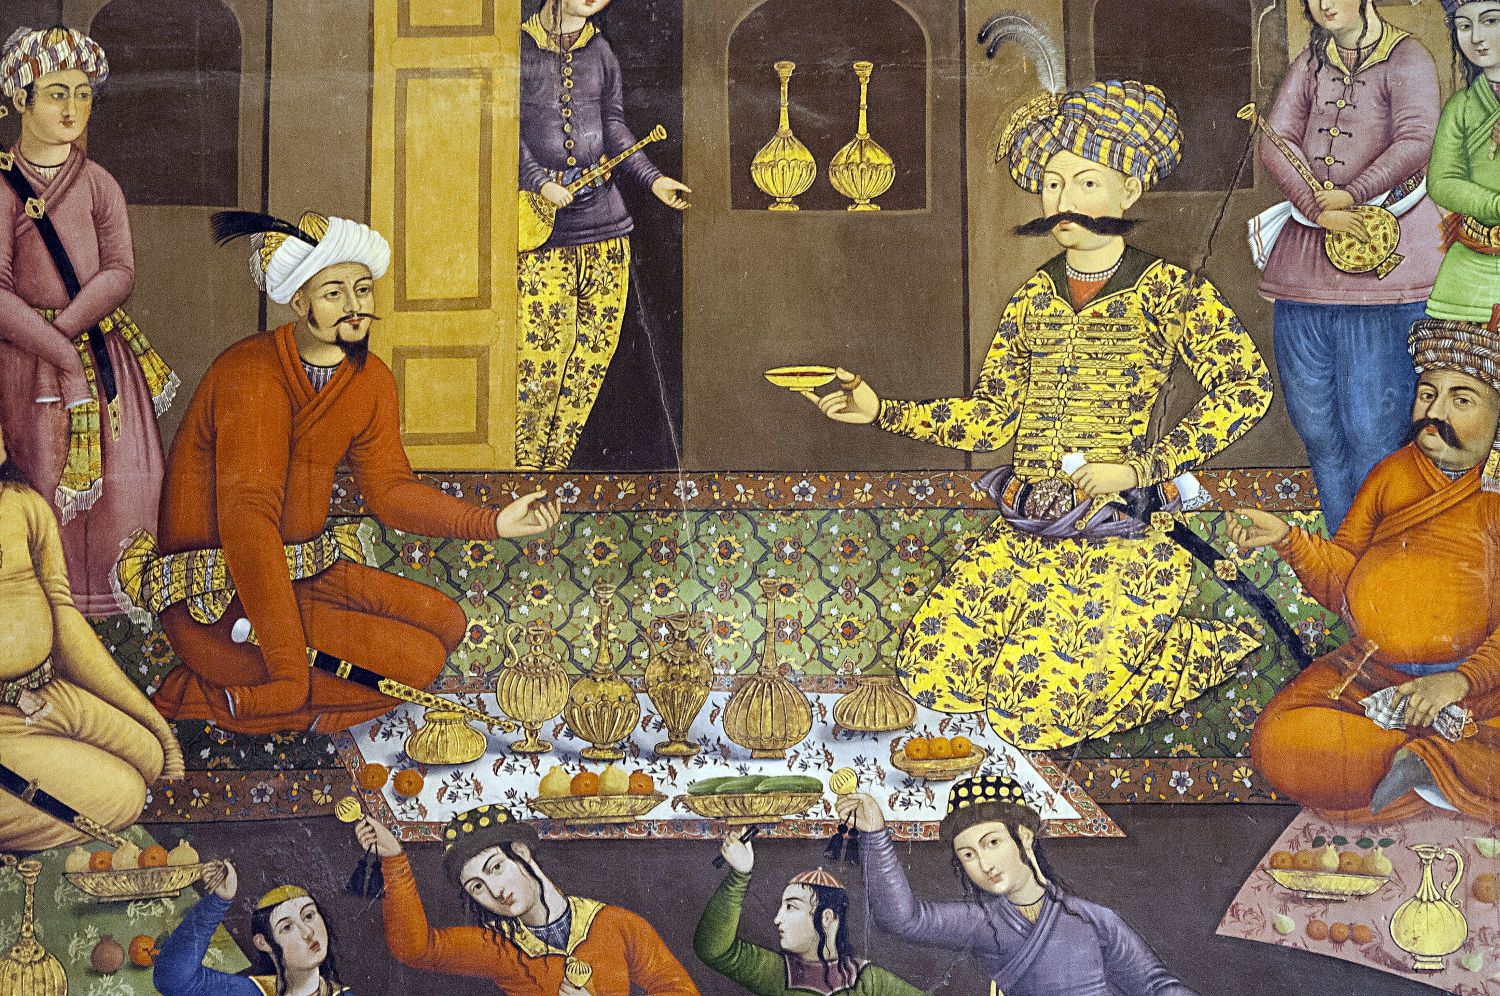 <p>Central audience hall, detail of painting on west wall of north bay. This painting depicts a reception between Shah Abbas I and Uzbek ruler Vali Muhammad Khan. This view shows the central figures, Shah Abbas and Vali Muhammad Khan.</p>